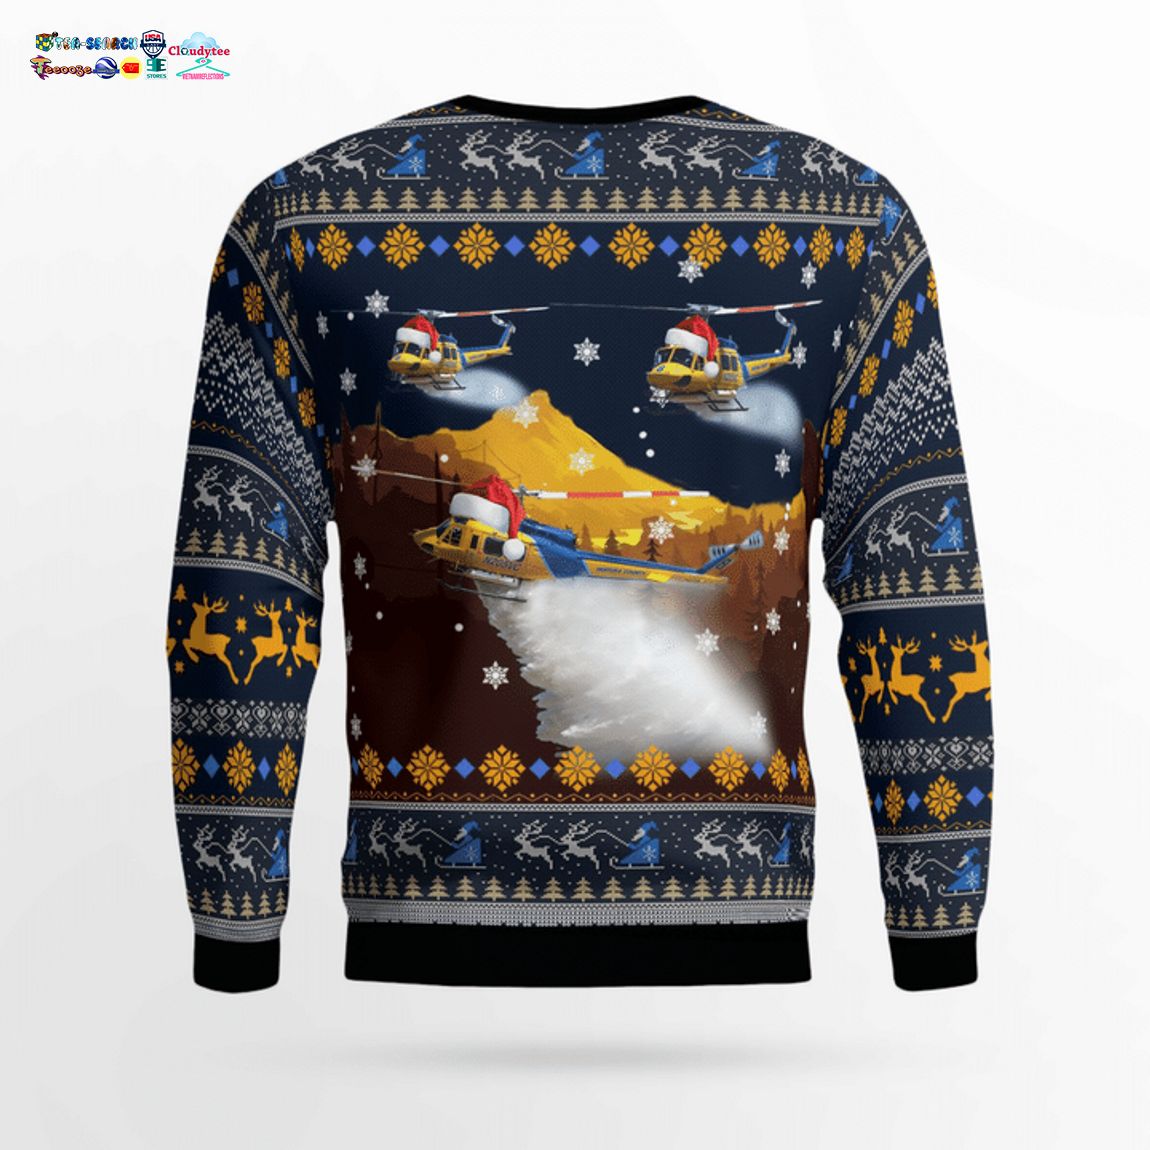 Ventura County Sheriff Fire Support Bell 205A-1 3D Christmas Sweater